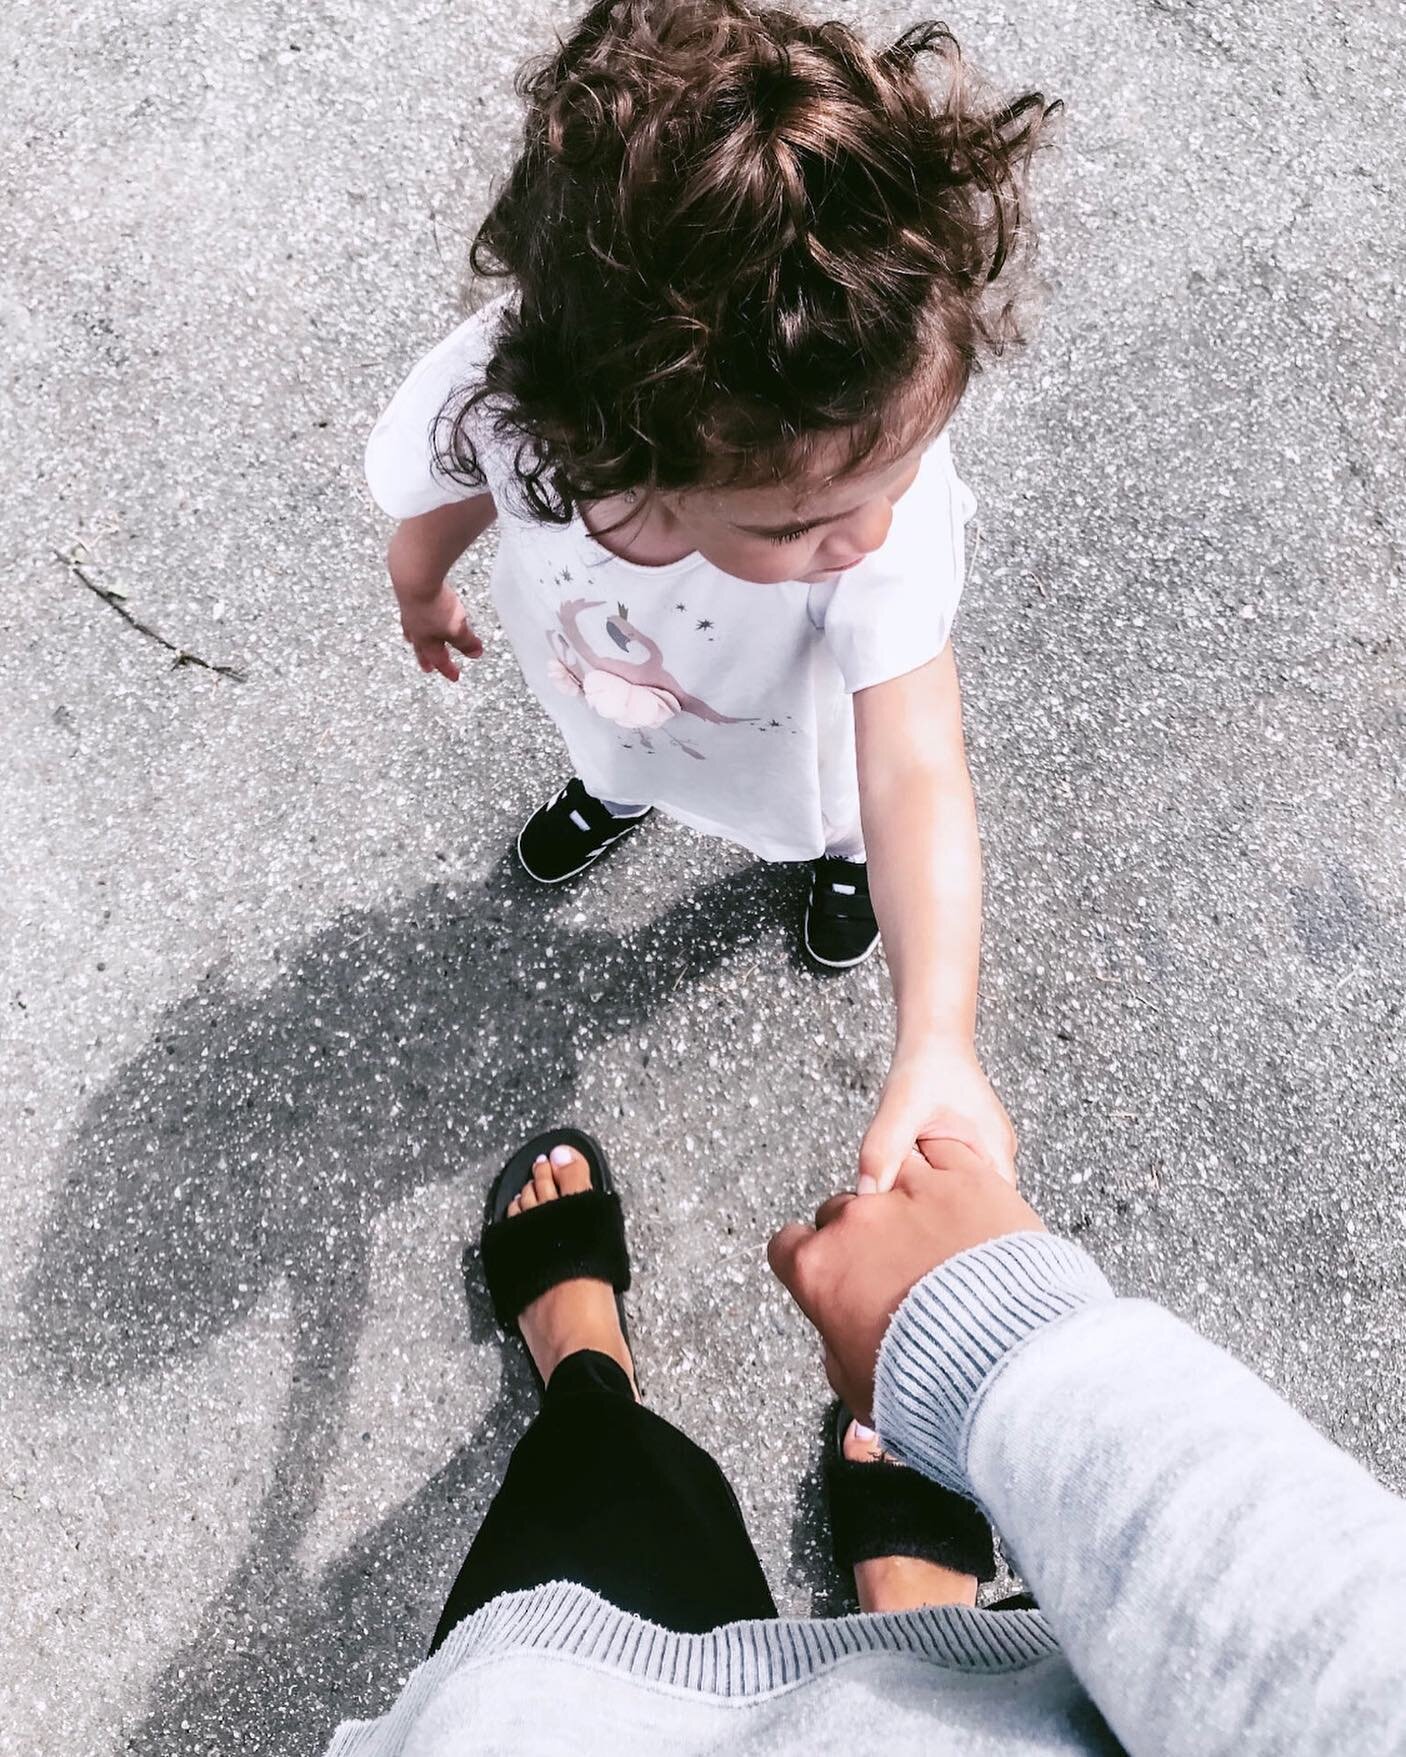 Can you hold my hand forever 😭😭
Daydreaming of Summer and NO socks 🧦
⠀⠀⠀⠀⠀⠀⠀⠀⠀
My baby&rsquo;s inspire me everyday.
⠀⠀⠀⠀⠀⠀⠀⠀⠀
When I feel like I can&rsquo;t do something I ask myself this:
⠀⠀⠀⠀⠀⠀⠀⠀⠀
👏🏼What if one of the kids felt like they weren